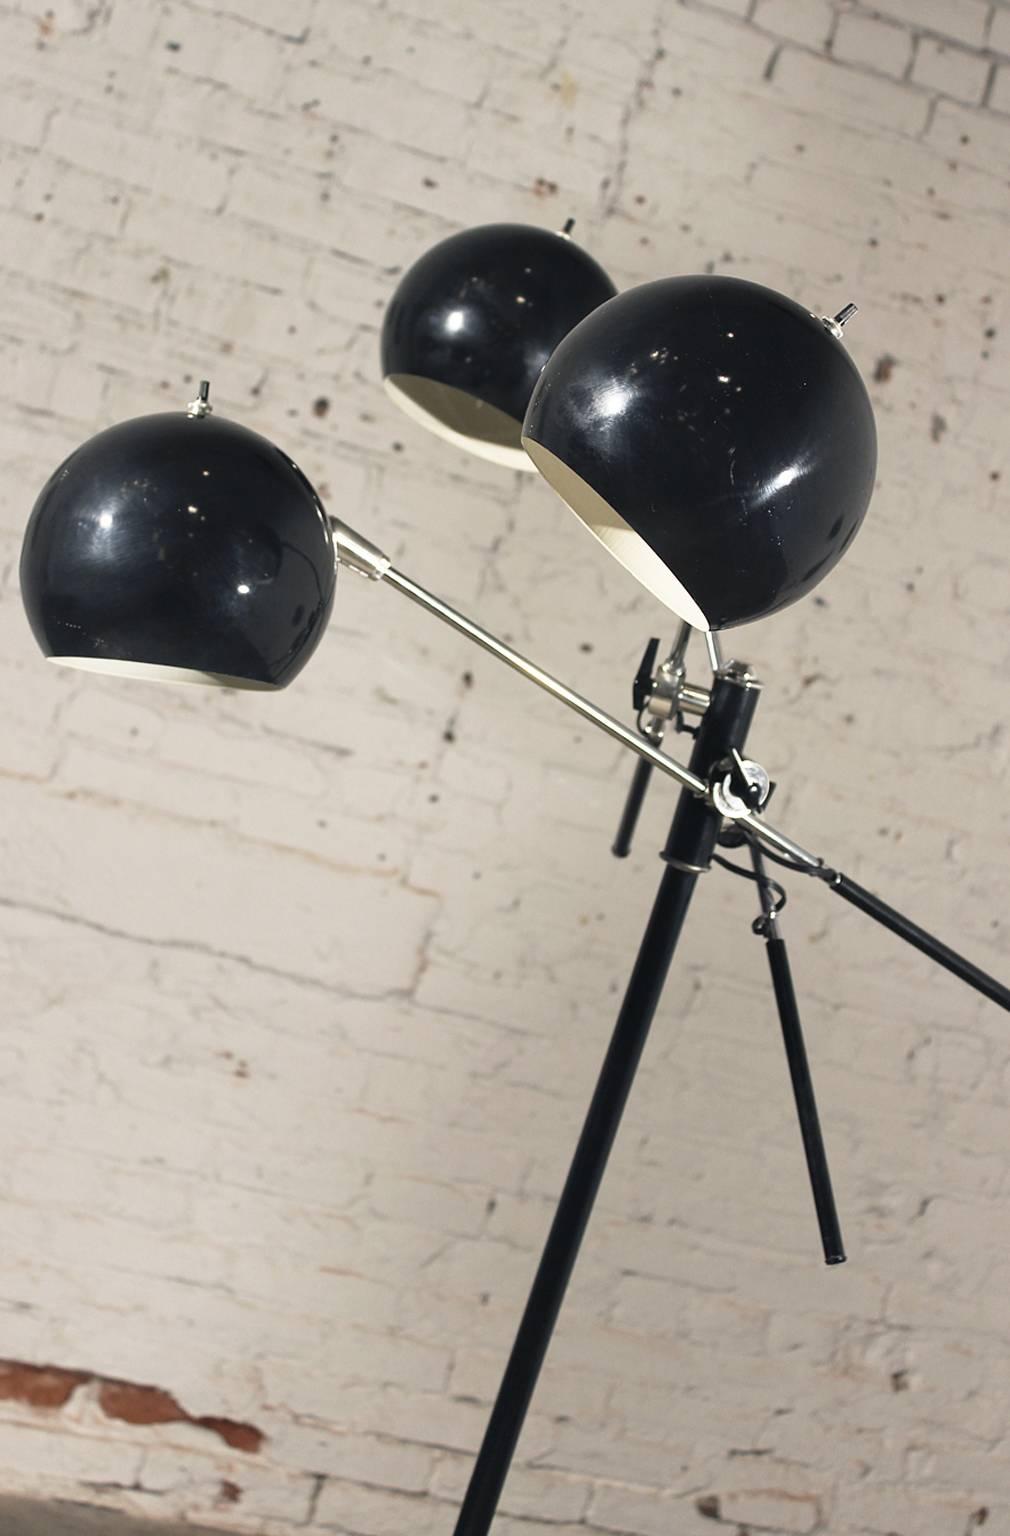 This is a fantastic articulated three-arm Mid-Century Modern floor lamp in the style of the Triennale Orbiter lamp designed by Robert Sonneman which was produced by Arredoluce. The three arms on this circa 1960s lamp pivot each ball shade